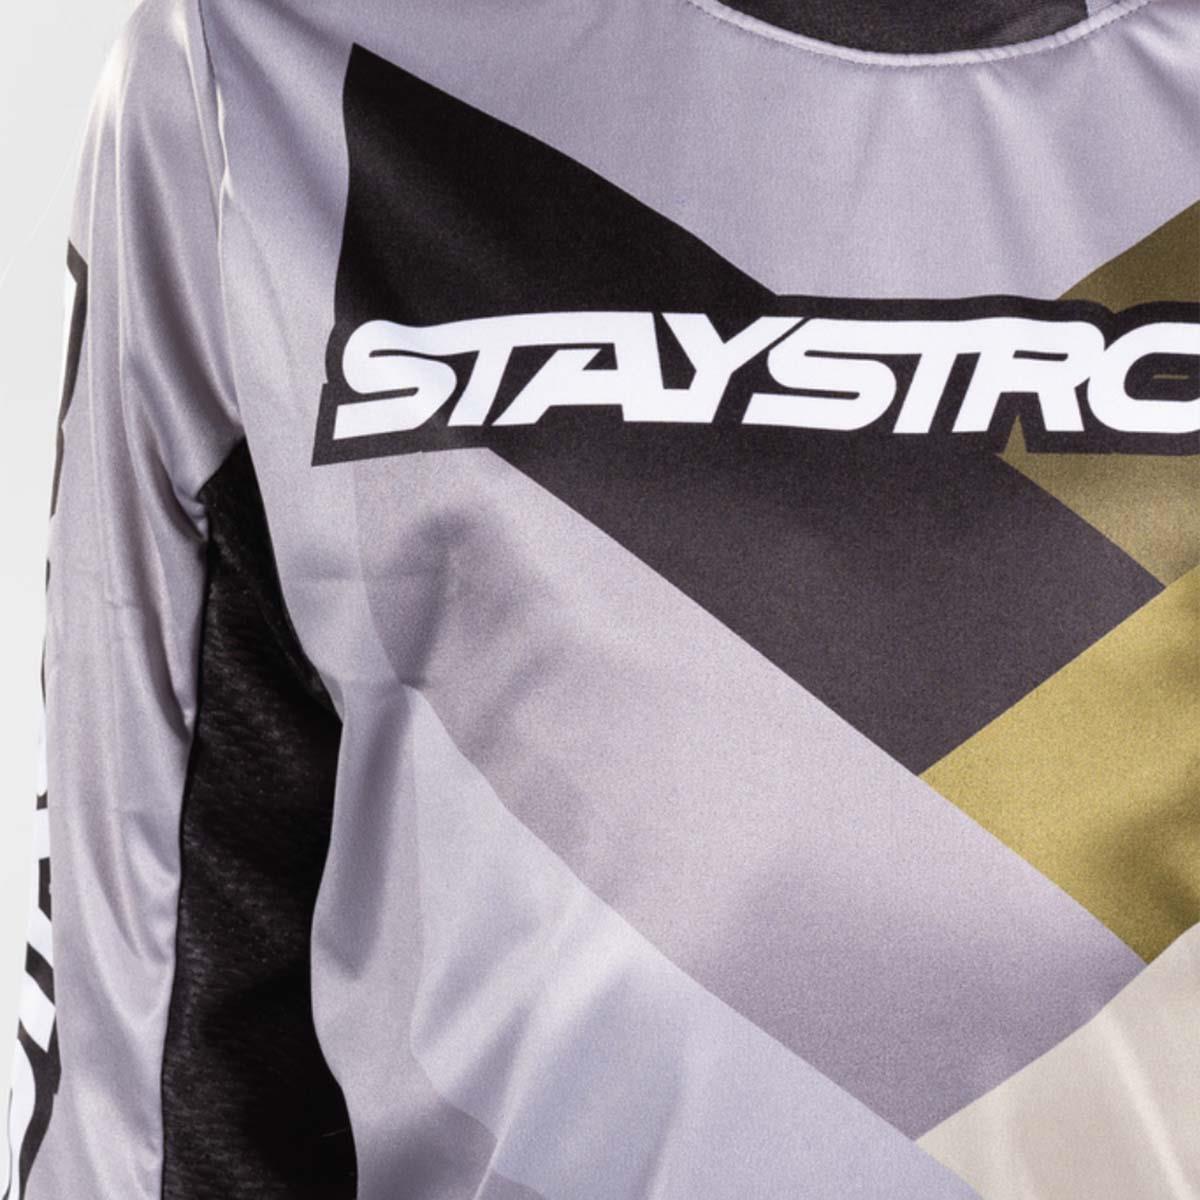 Stay Strong Youth Chevron Race Jersey - Grey